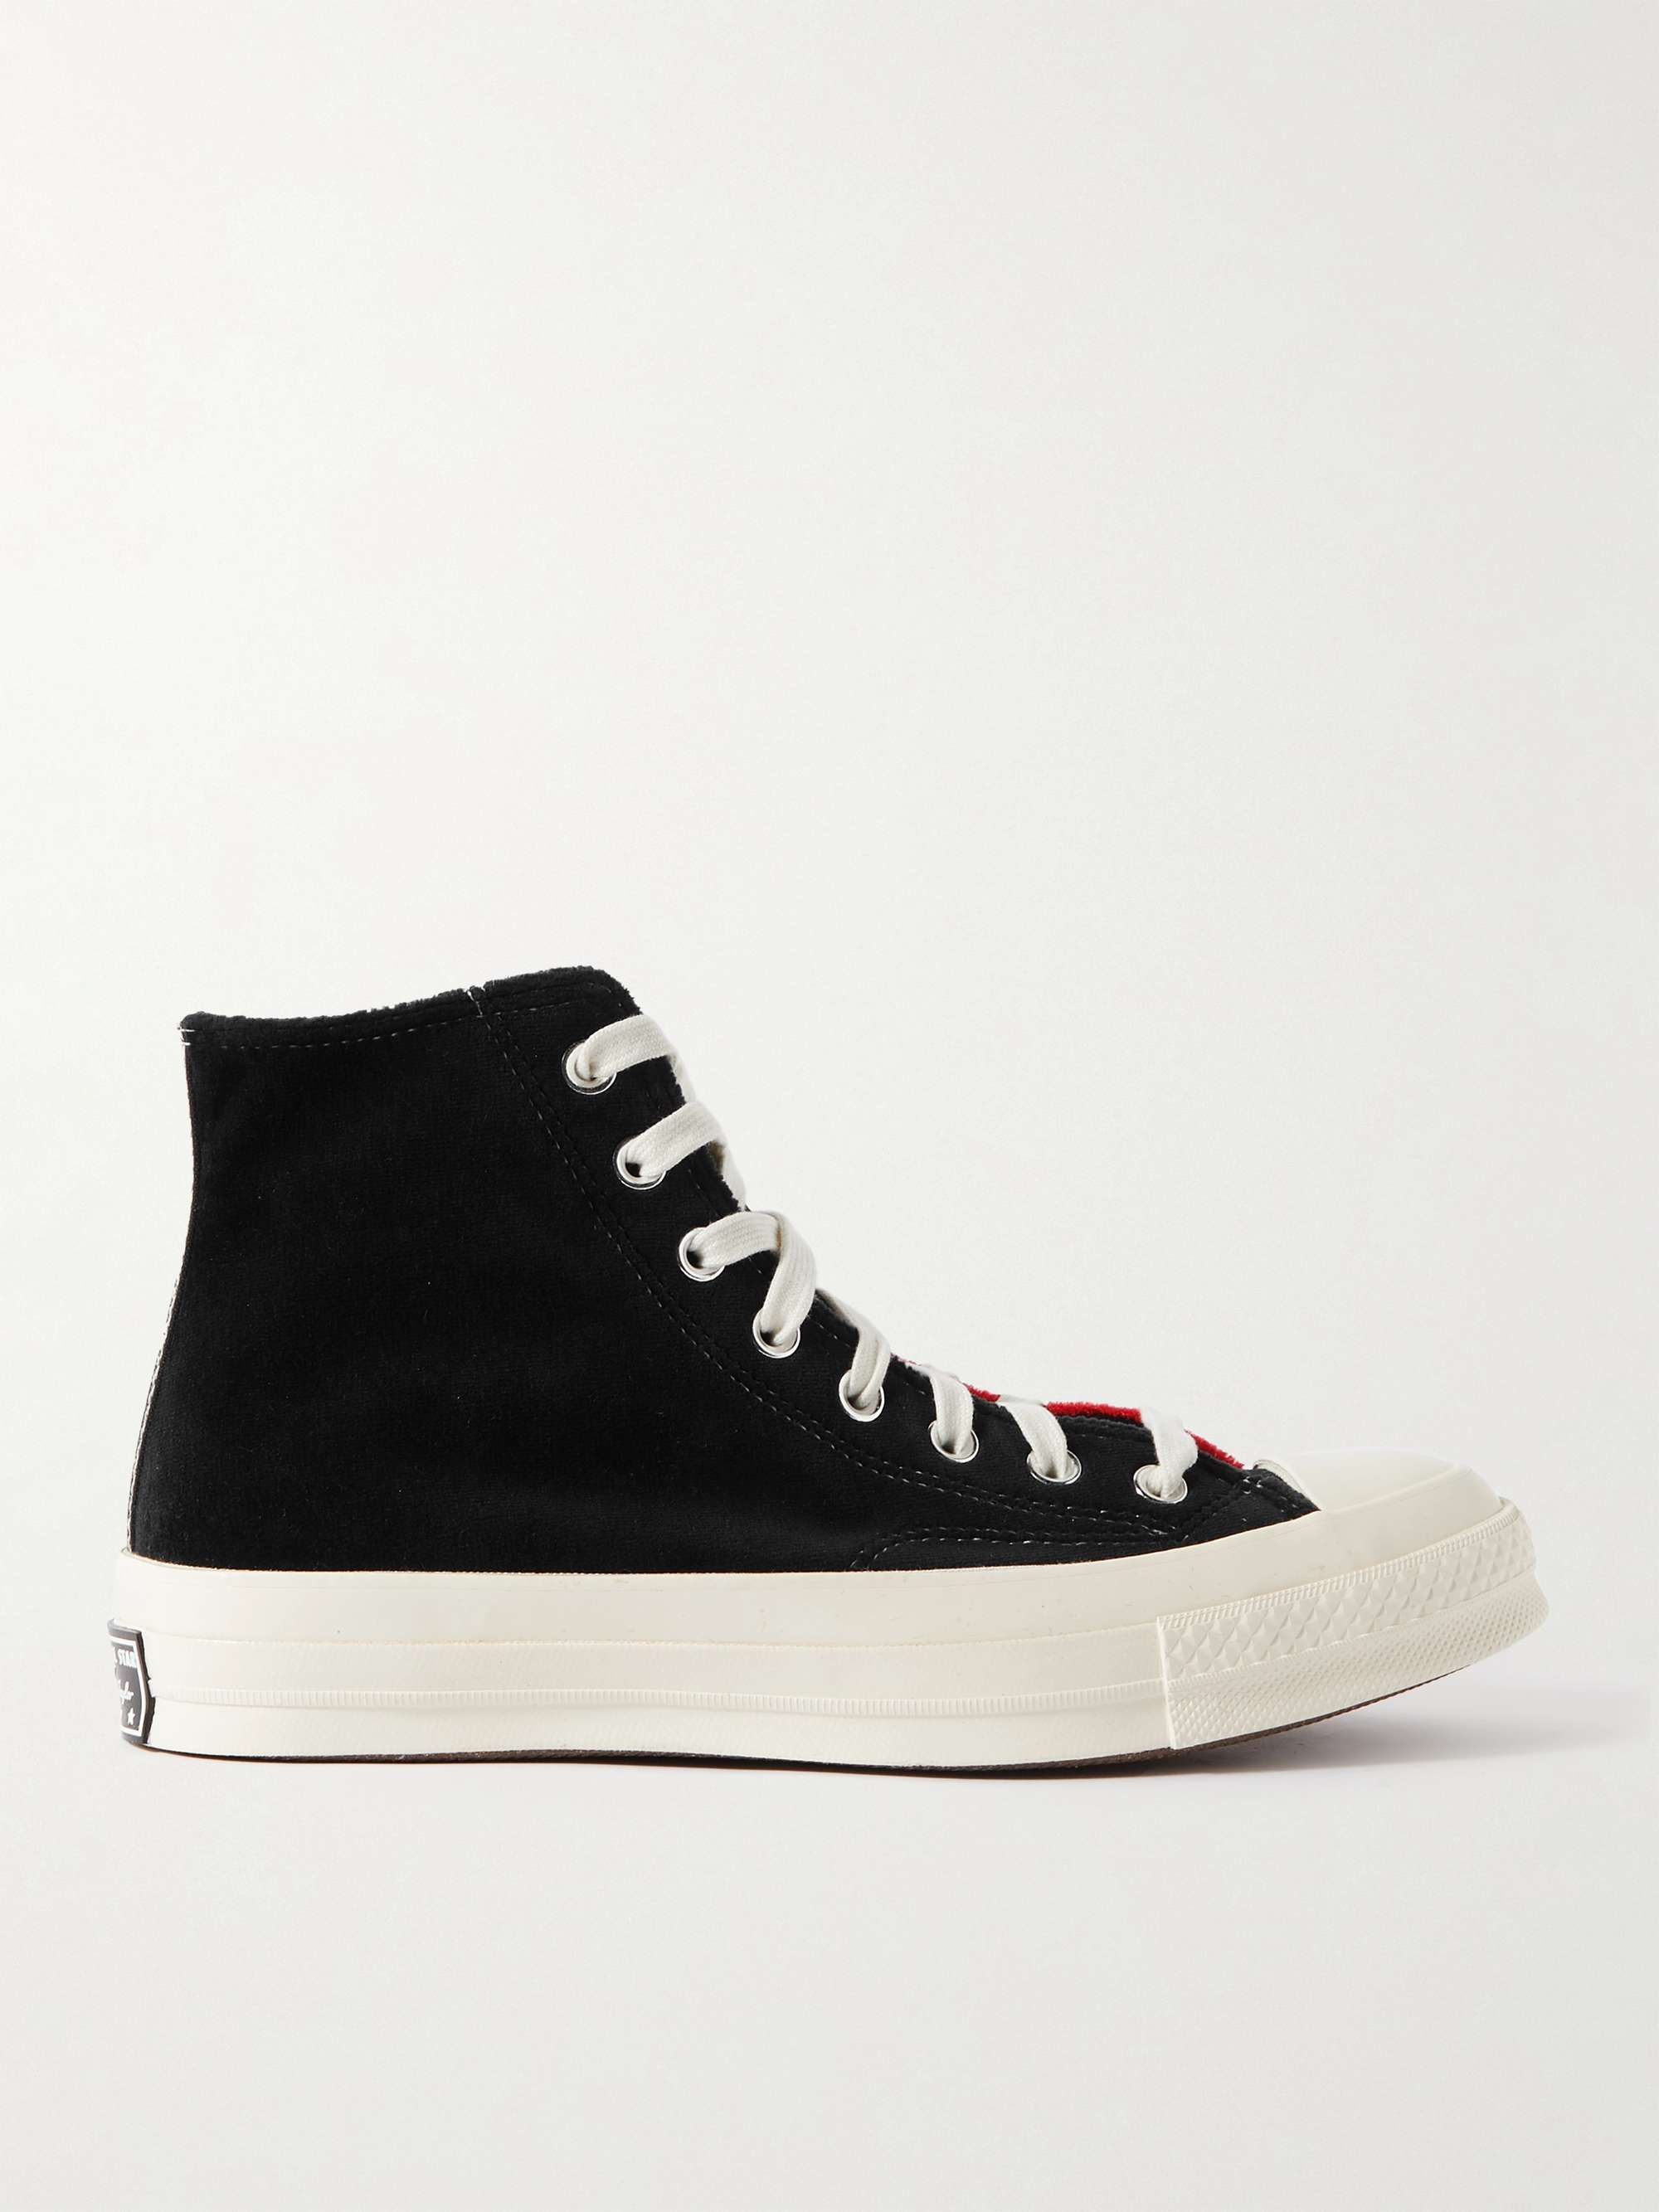 Black + Beyond Retro Chuck 70 Upcycled Two-Tone Velvet High-Top Sneakers |  CONVERSE | MR PORTER